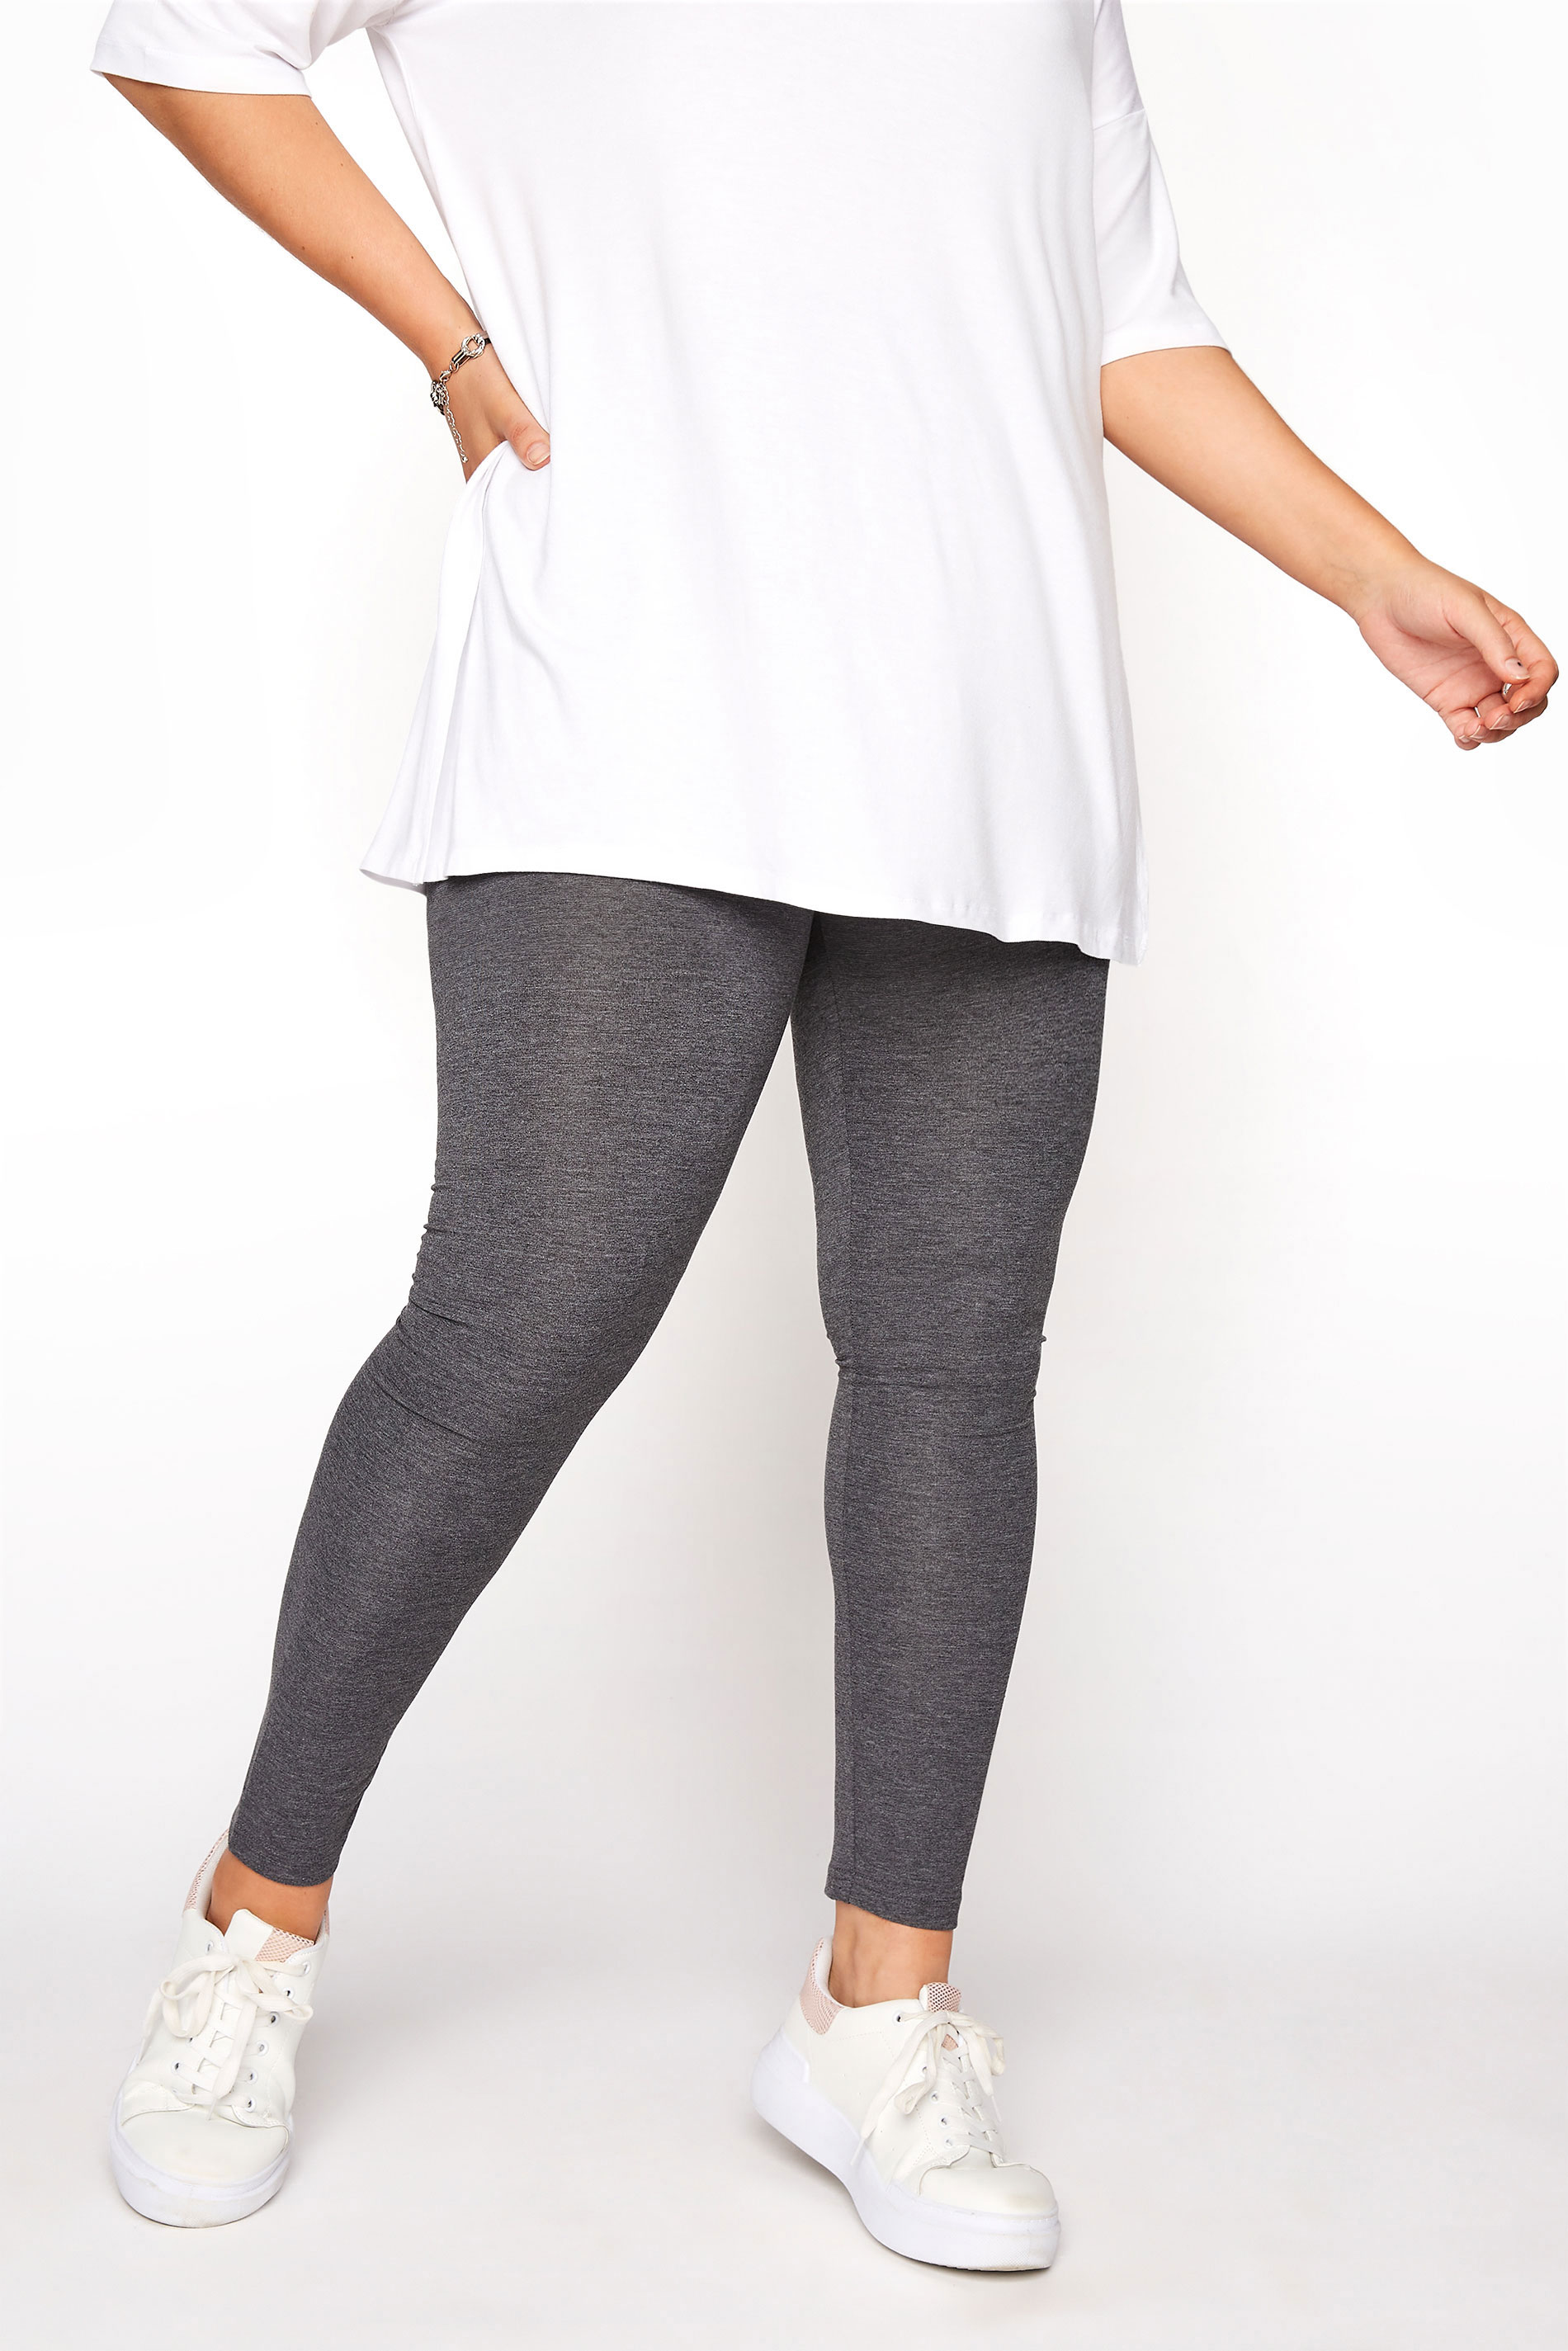 Absolute Support Opaque Graduated Compression Leggings with Control Top -  Firm Support 20-30mmHg - A717